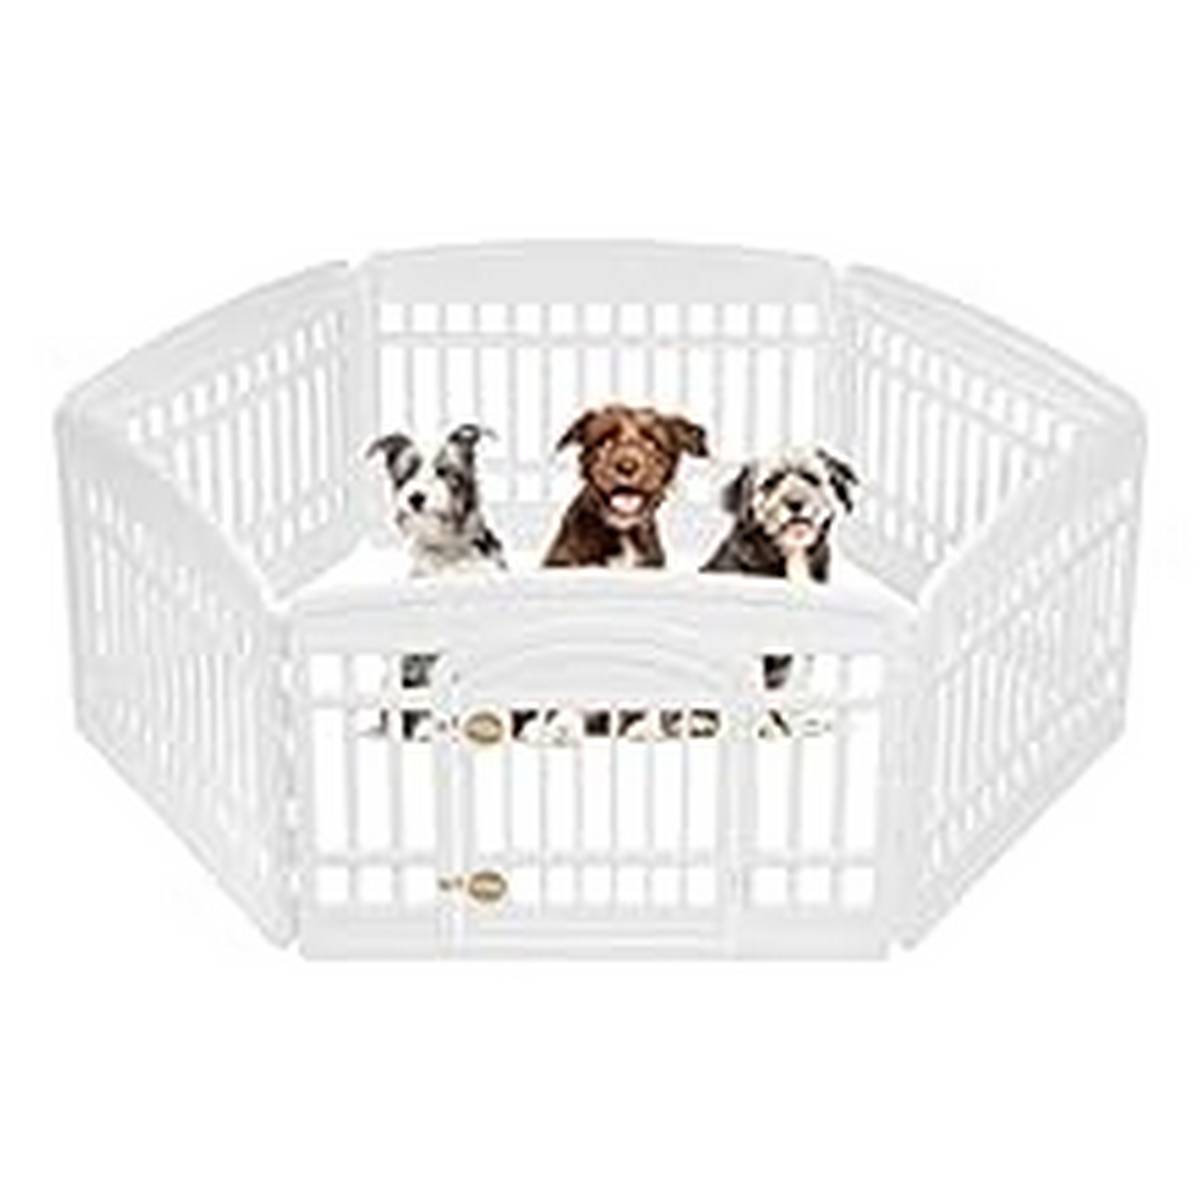 Supplies_IRIS USA Exercise -Panel Pet Playpen with Door Dog Cat Playpen For Puppy Small Dogs Keep Pets Secure Easy Assemble Easy Storing Customizable Non-Skid Rubber Feet White